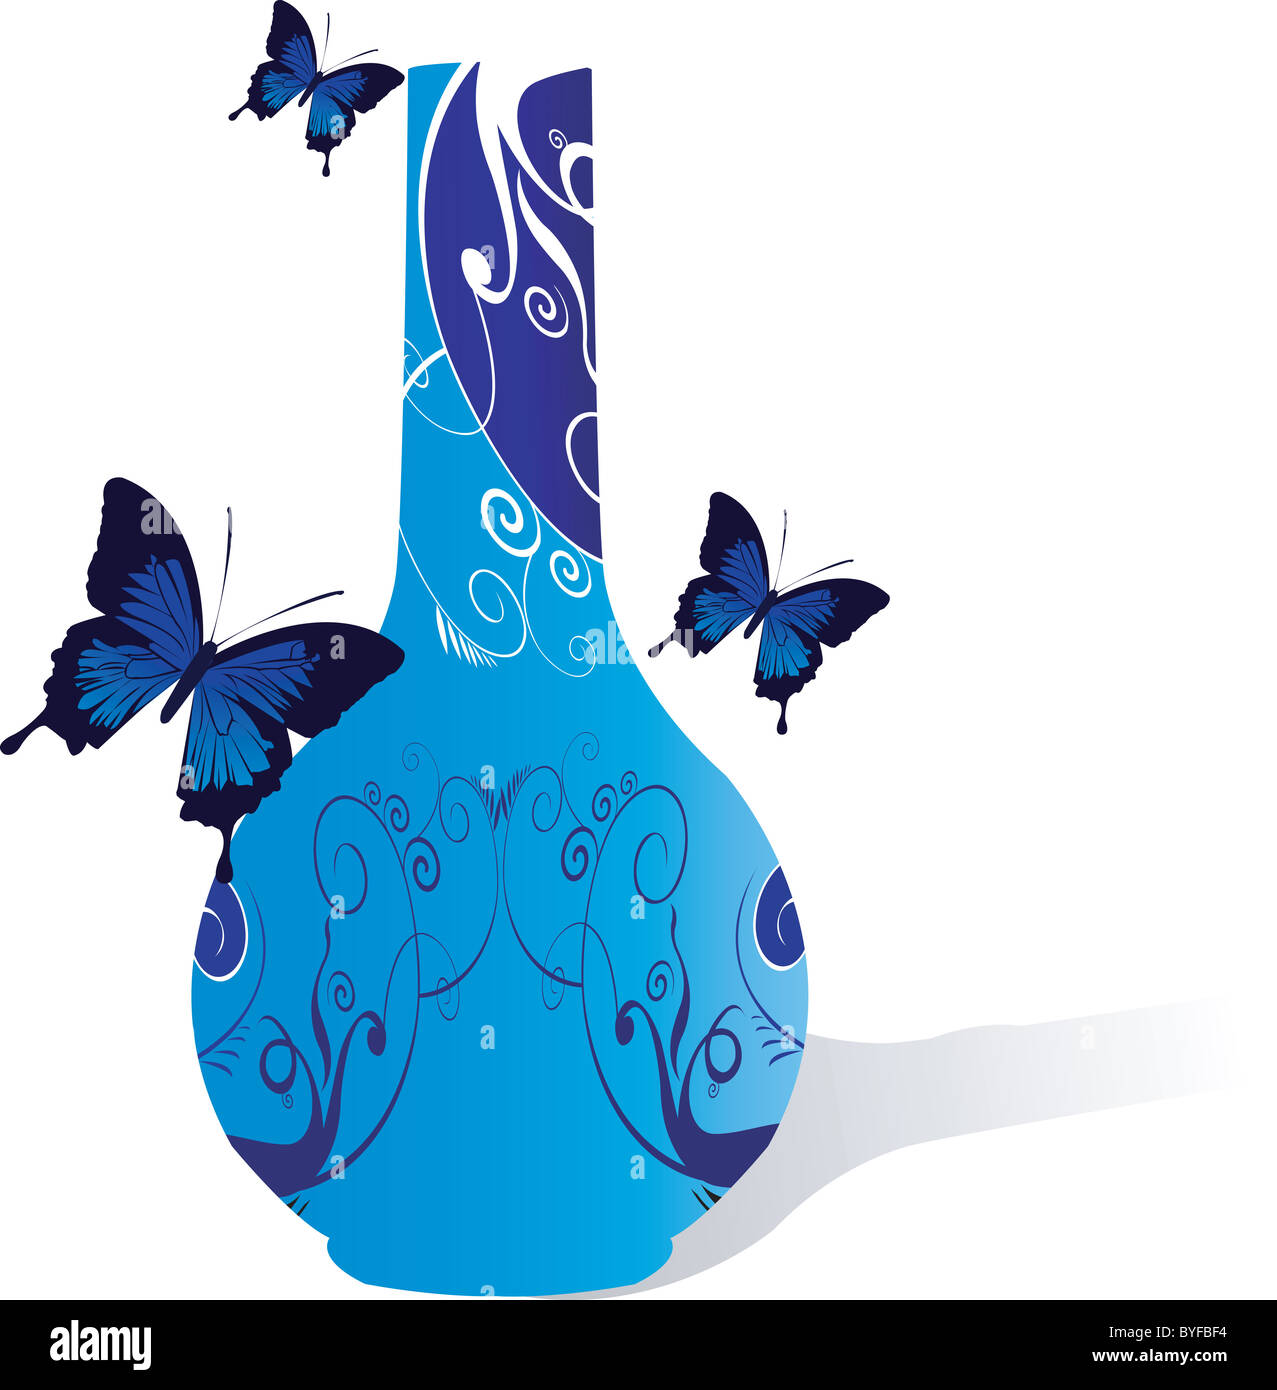 Illustration of a decorated flower vase with butterflies flying. Stock Photo